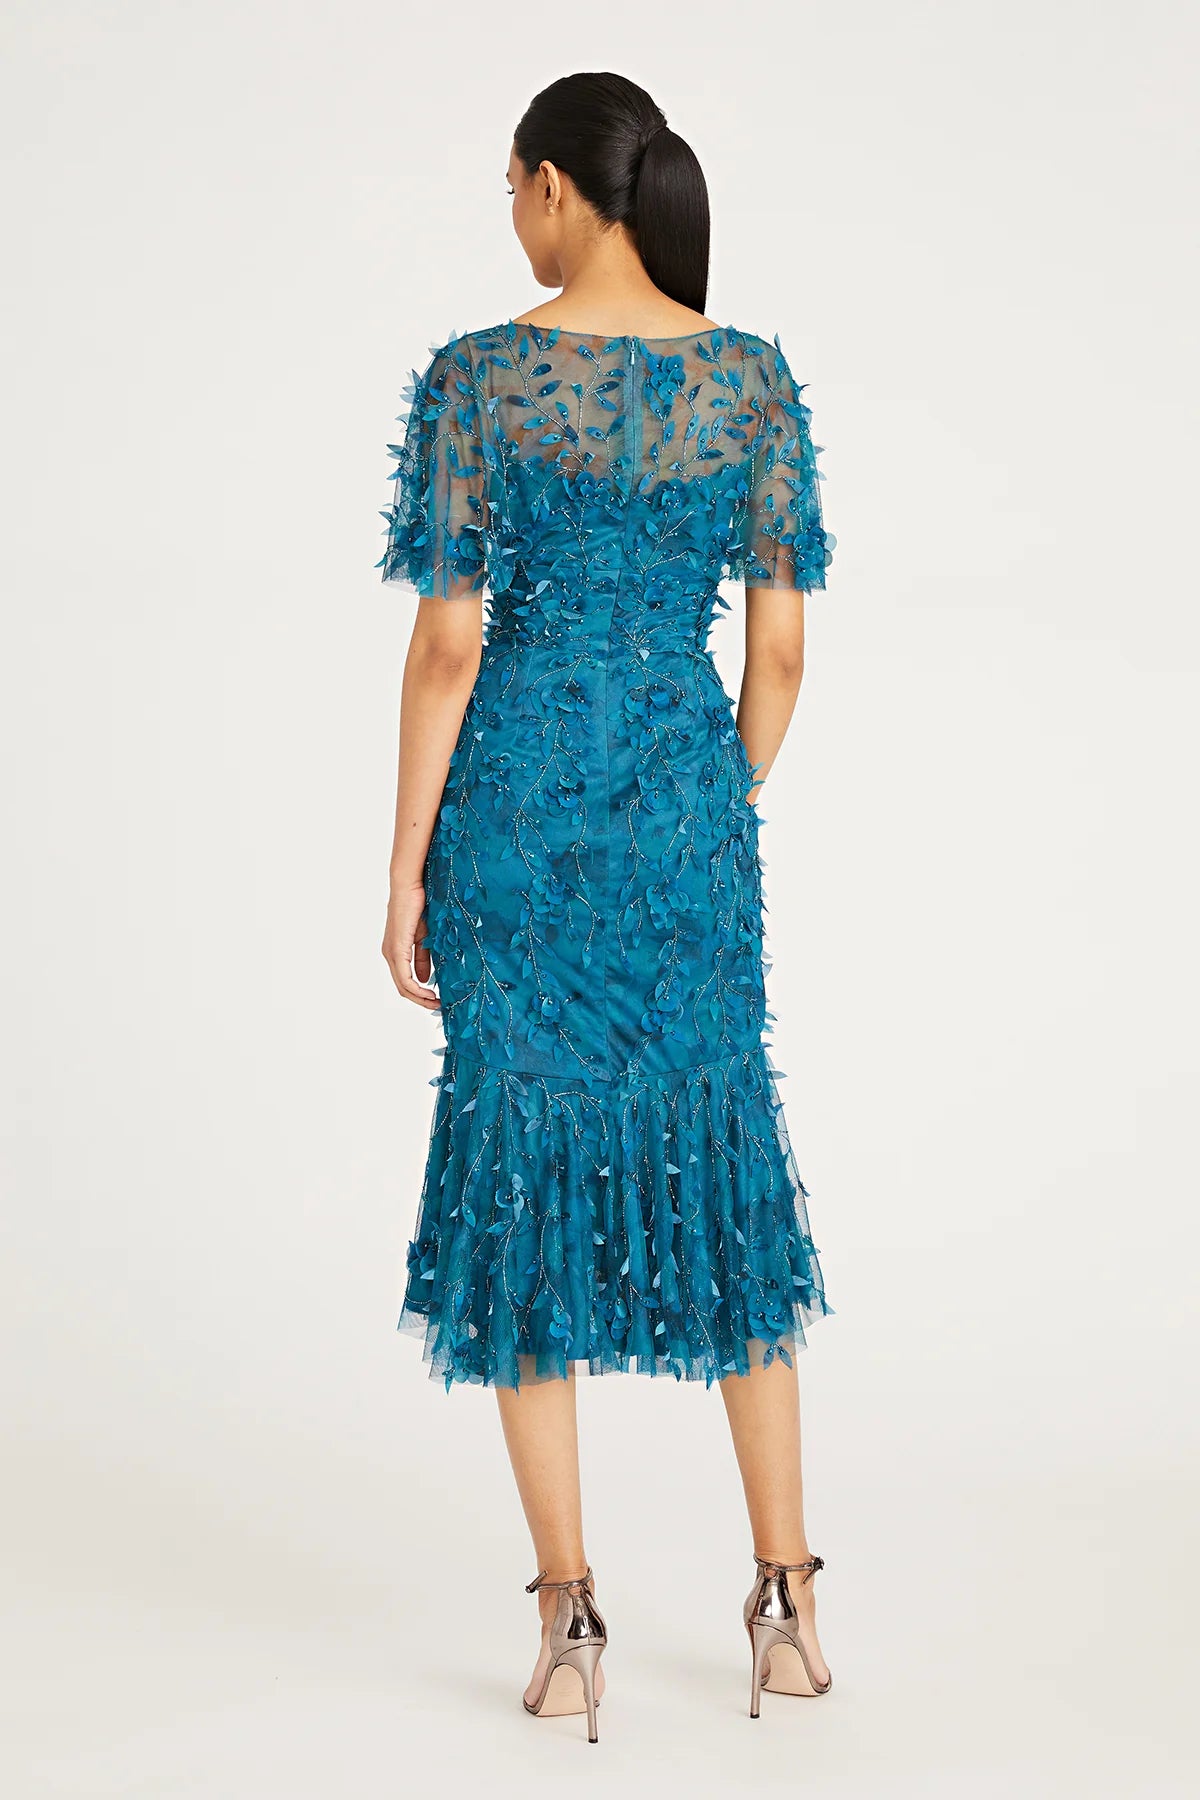 Theia Sloane Petal Cocktail Dress in Deep Sea - Flutter sleeve, beaded, fit-and-flare silhouette. Perfect for evening events.